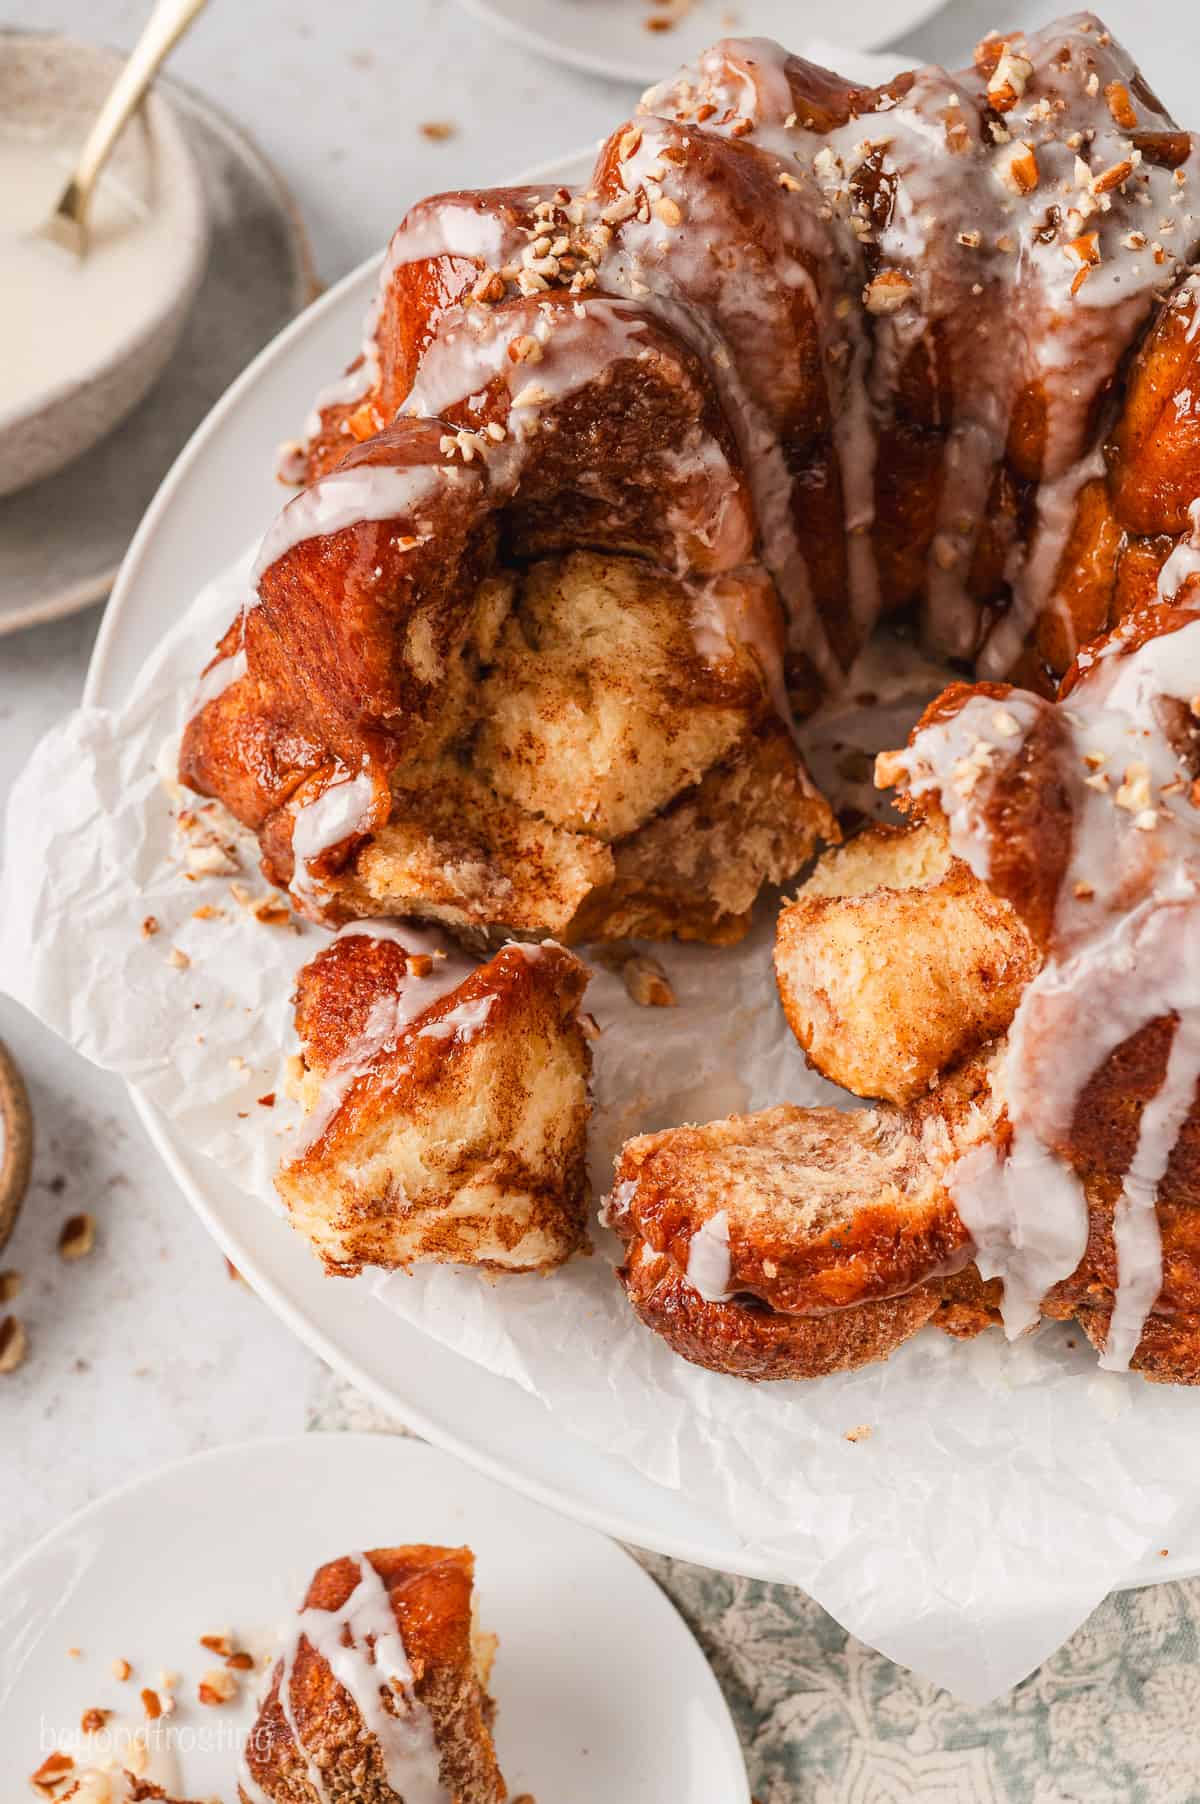 Partially torn apart monkey bread on a white plate.